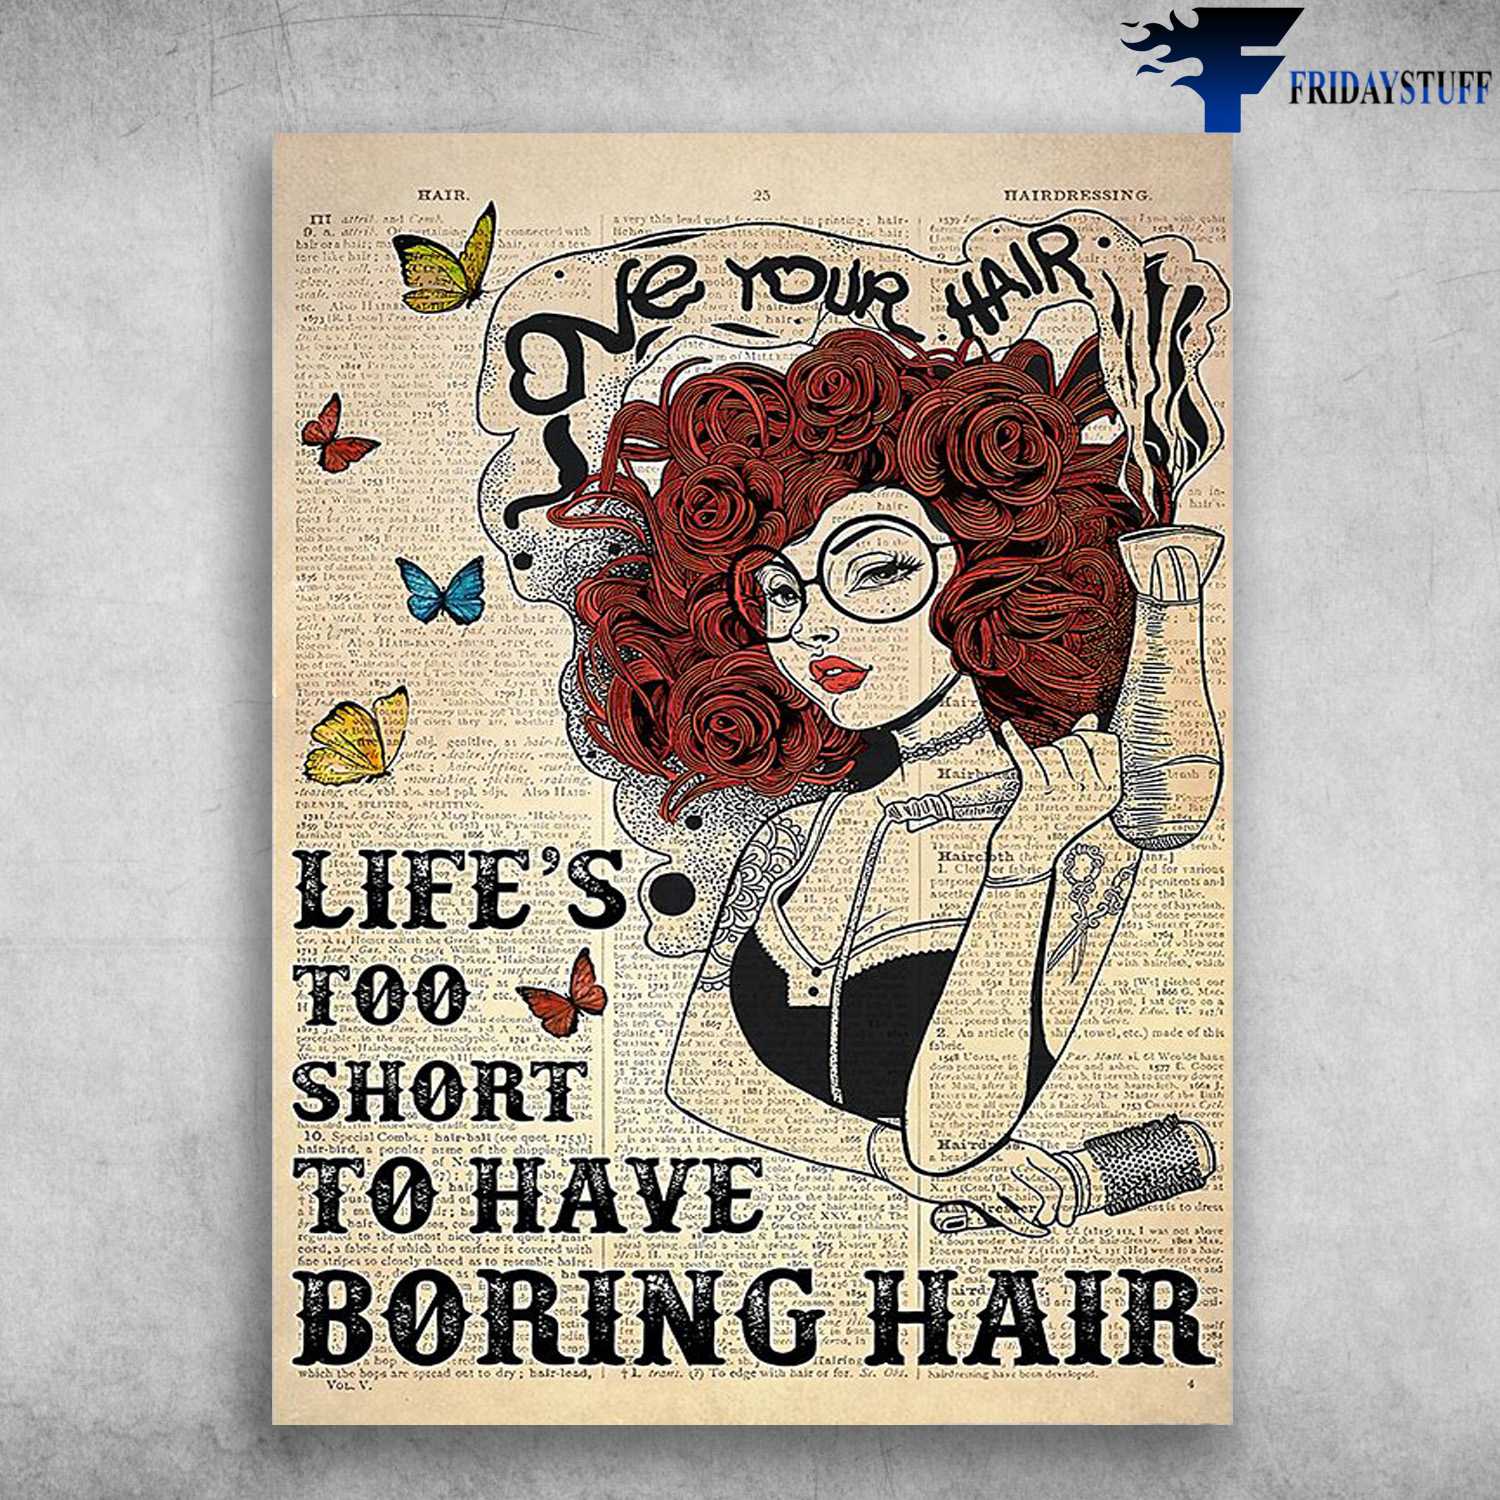 Barber Shop - Love Your Hair, Life's Too Short, To Have Boring Hair